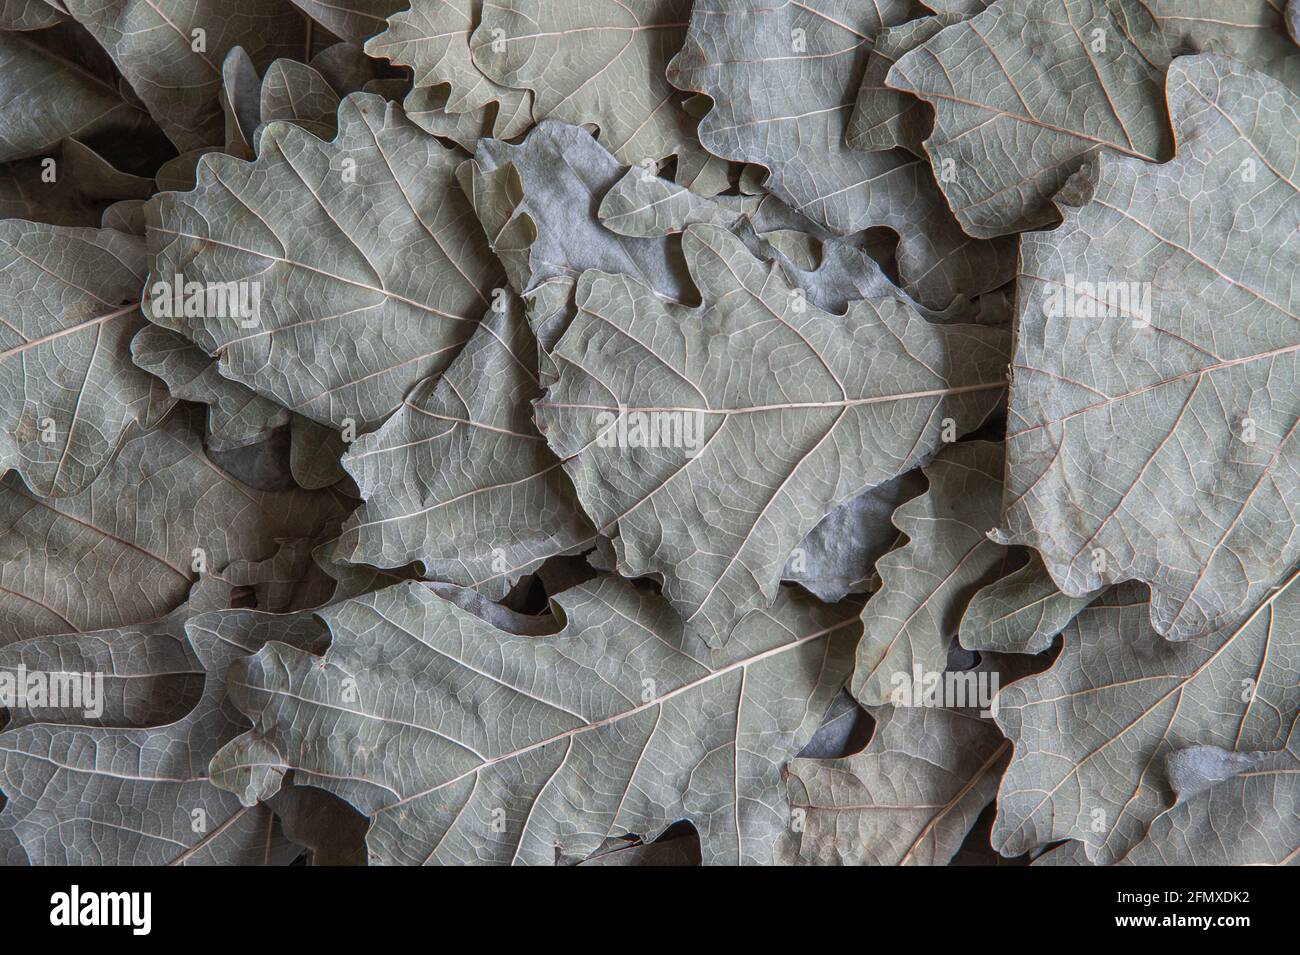 Background image of dry oak leaves on a bath broom. Close-up Stock Photo